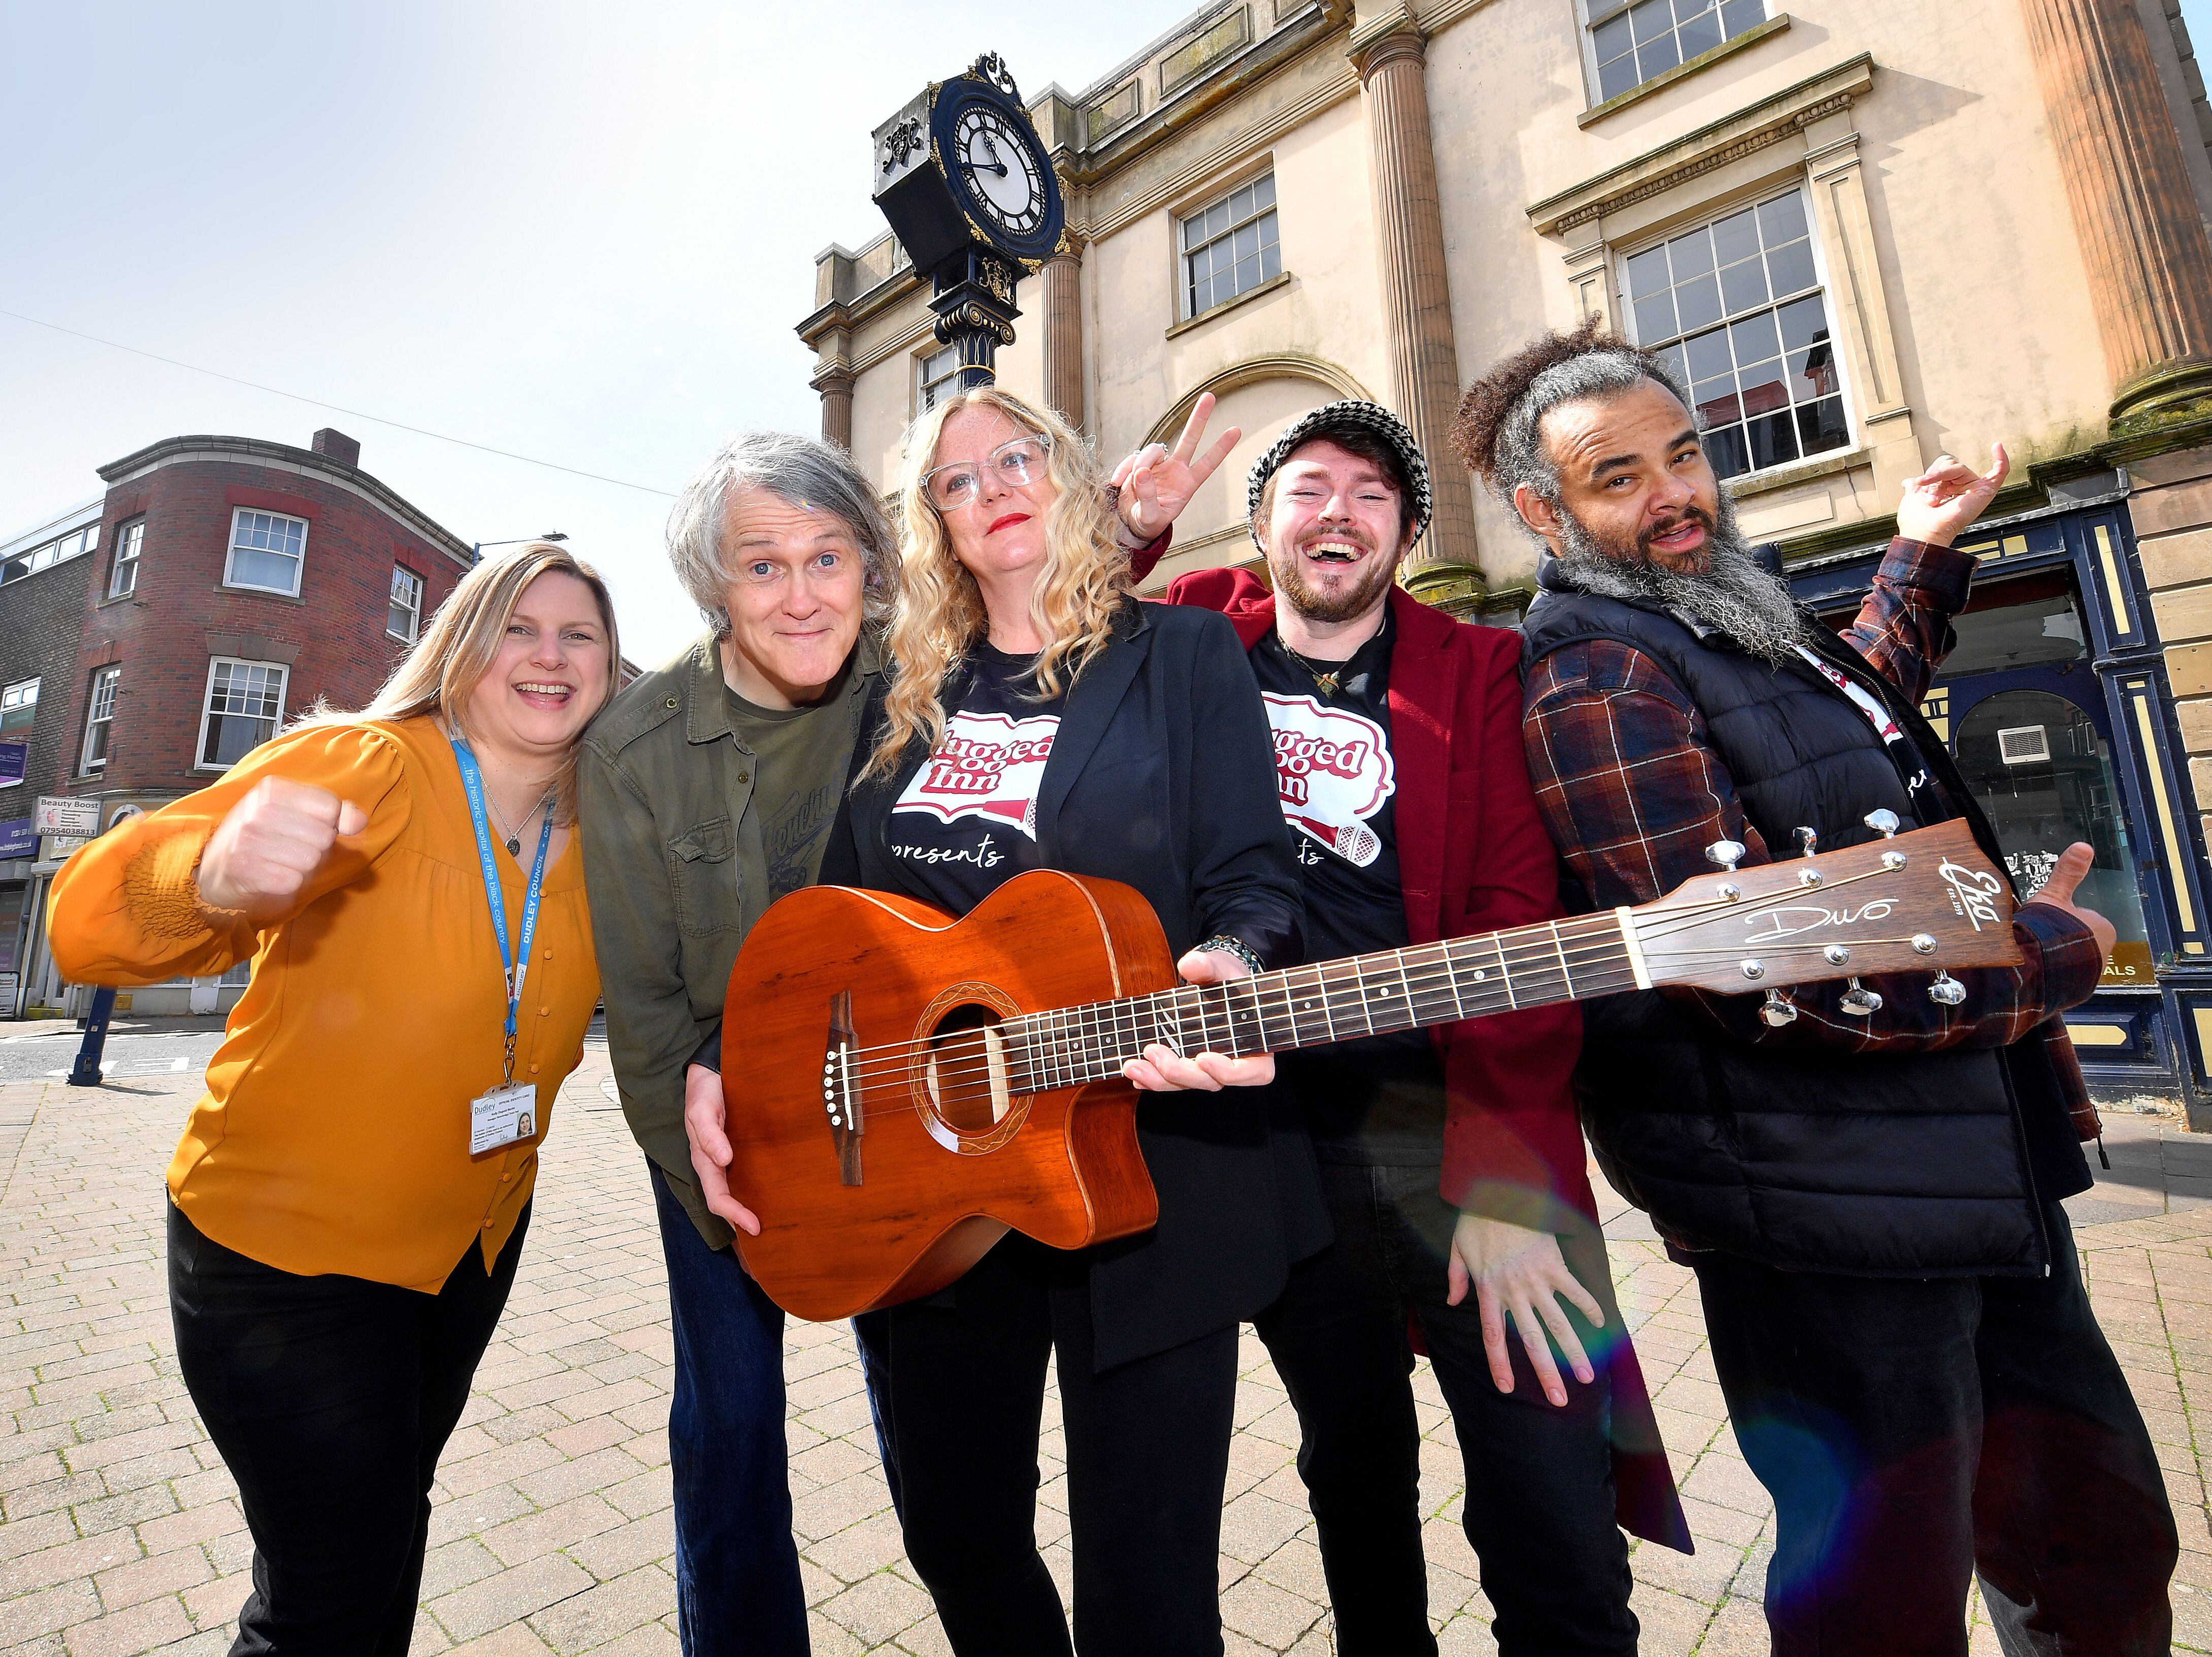 'We can't wait to welcome people to our town and celebrate its musical heritage'